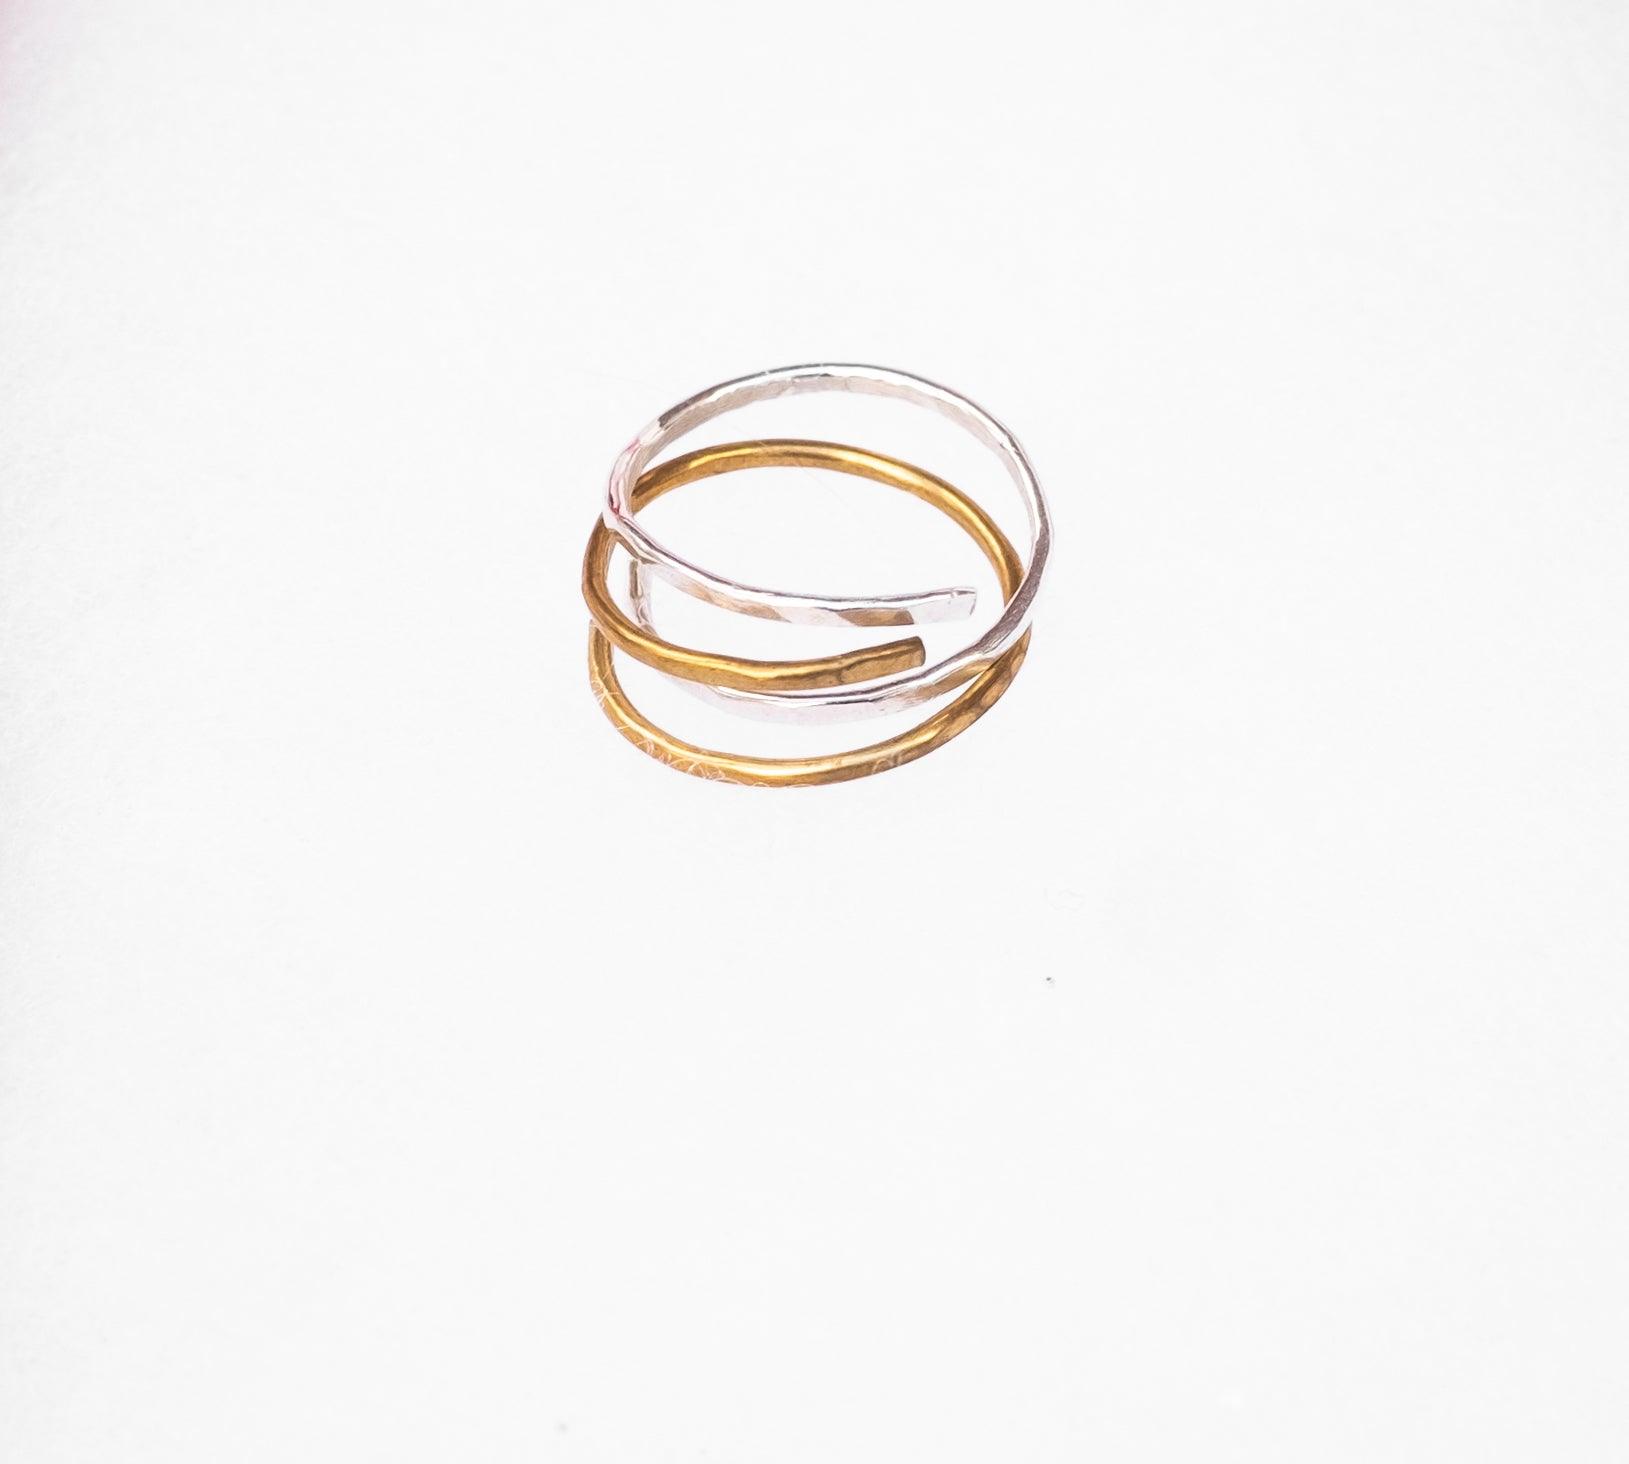 Hand-Hammered Wrap Ring in Brass - Forai